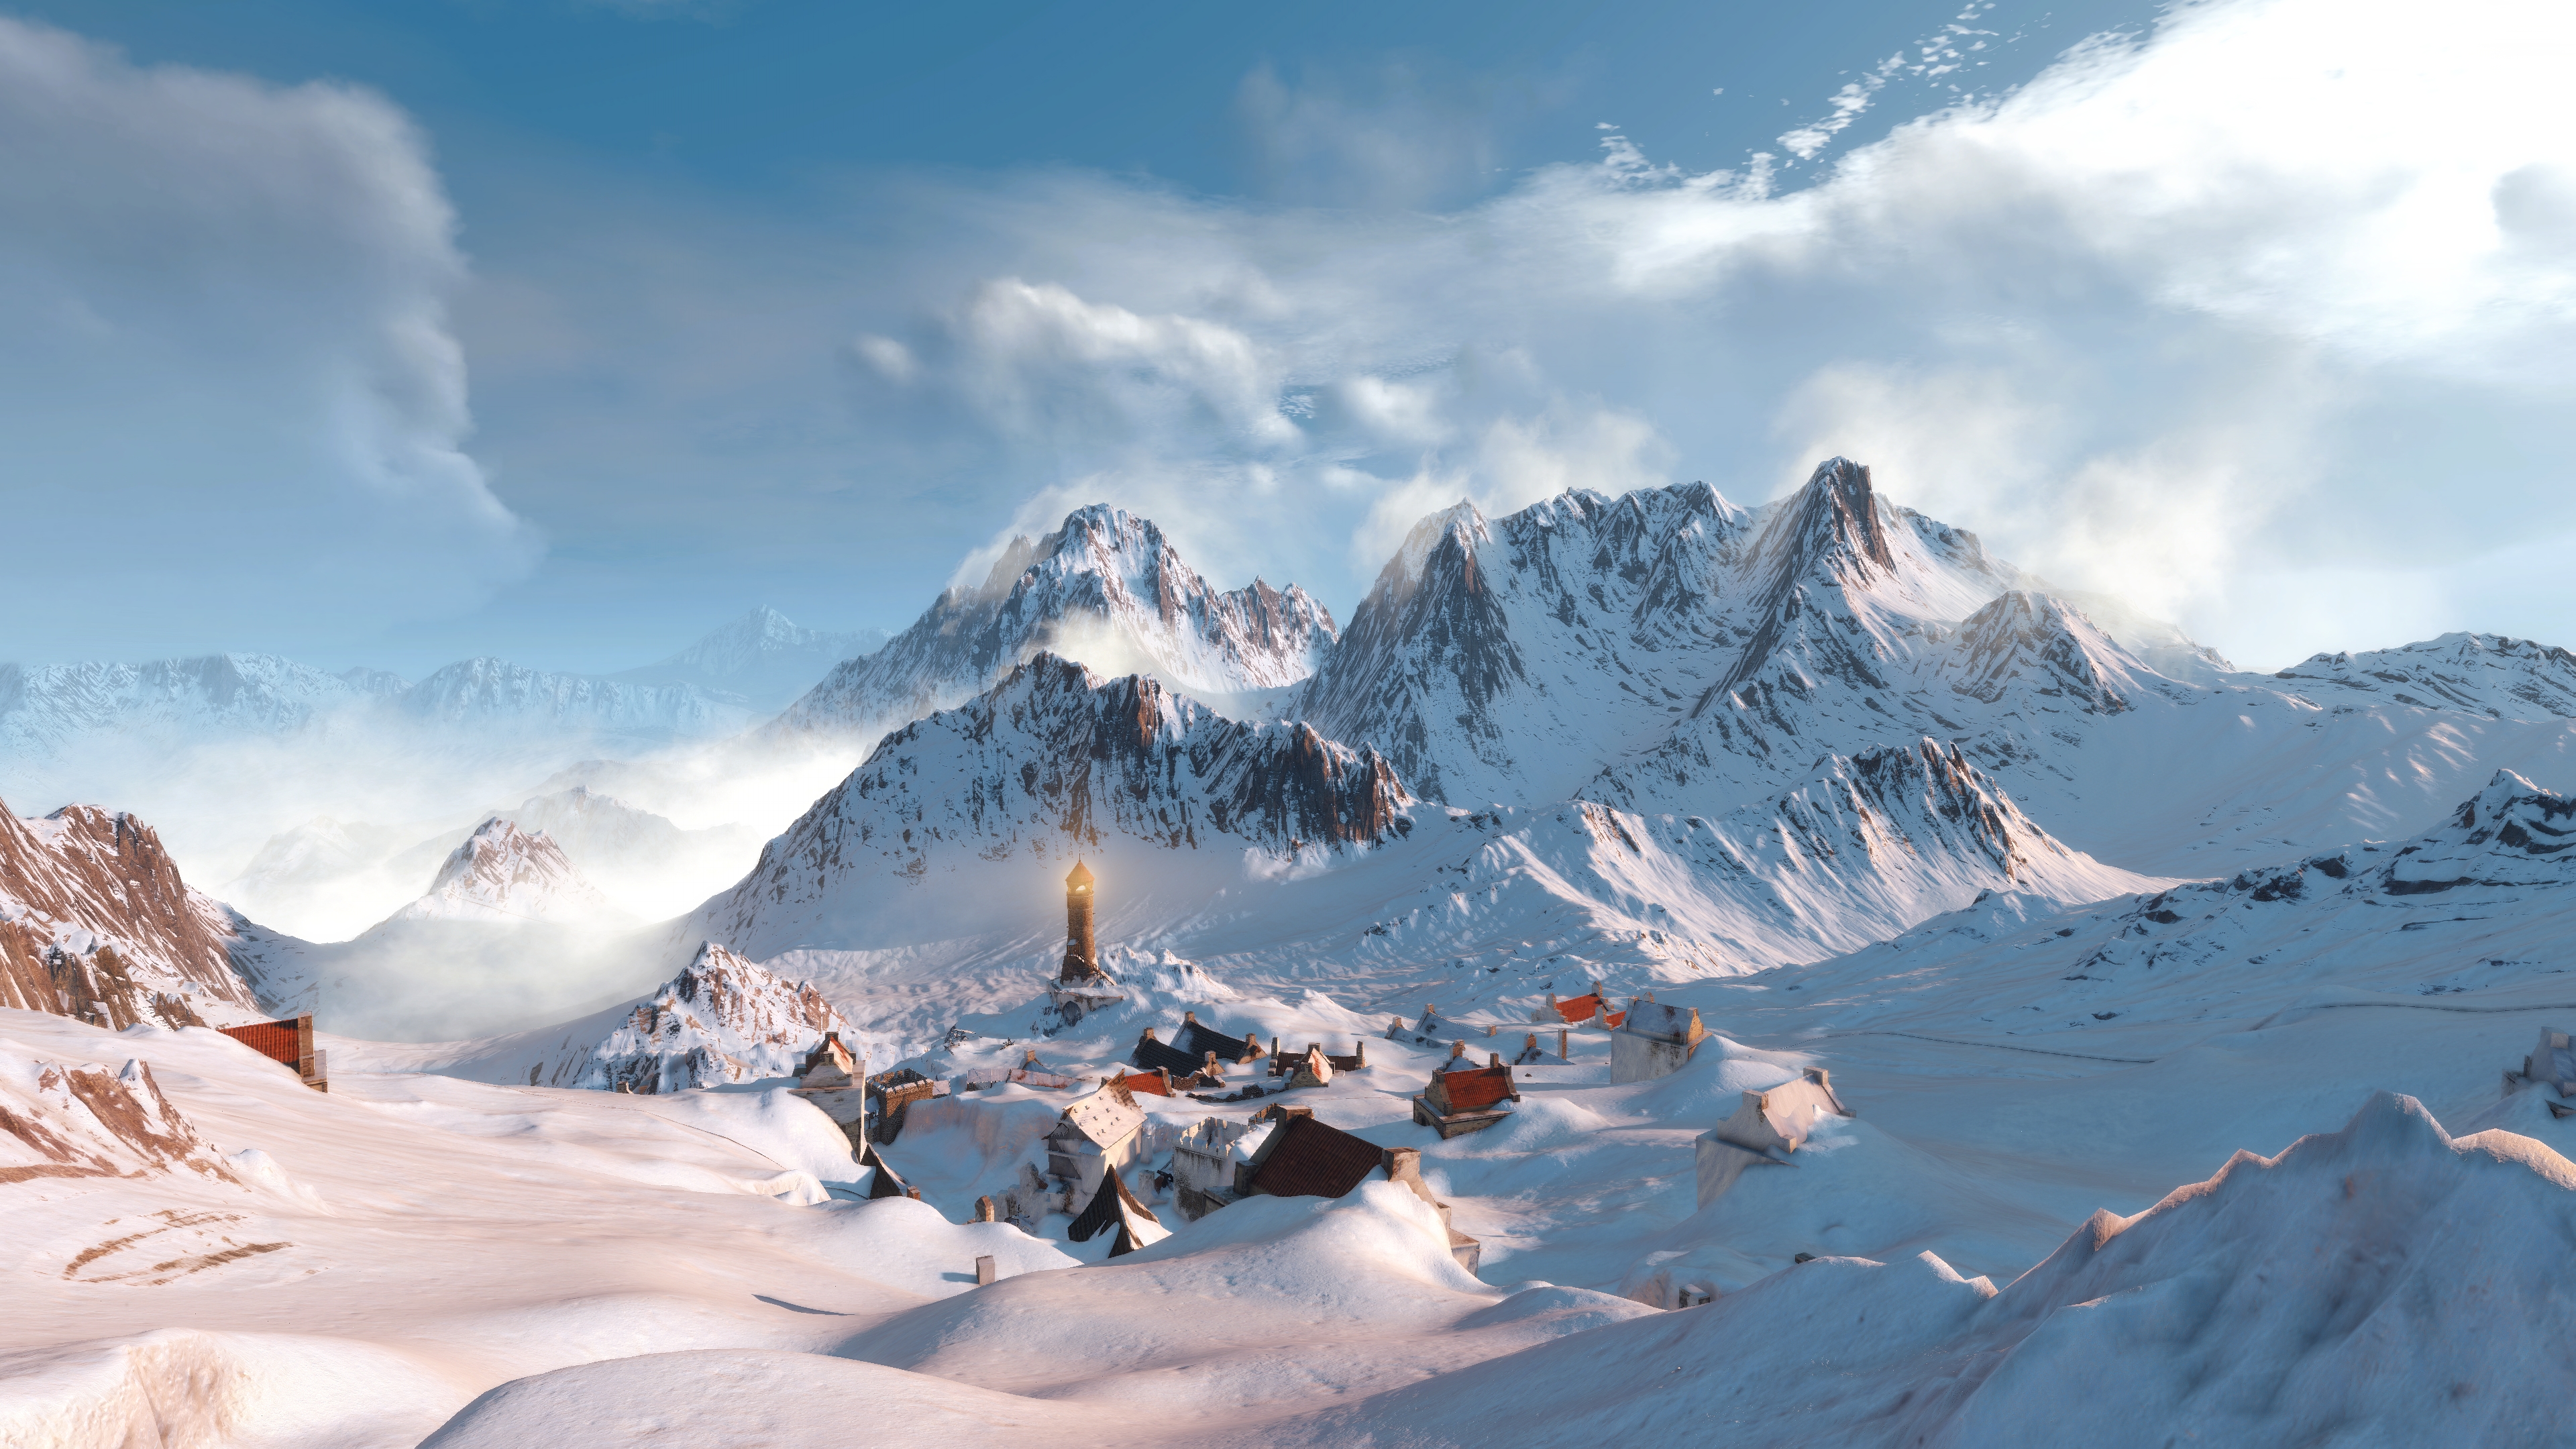 General 3840x2160 mountains snow lighthouse PC gaming video game art screen shot The Witcher 3: Wild Hunt sky clouds CGI video games snowy peak snowy mountain nature landscape snow covered mist